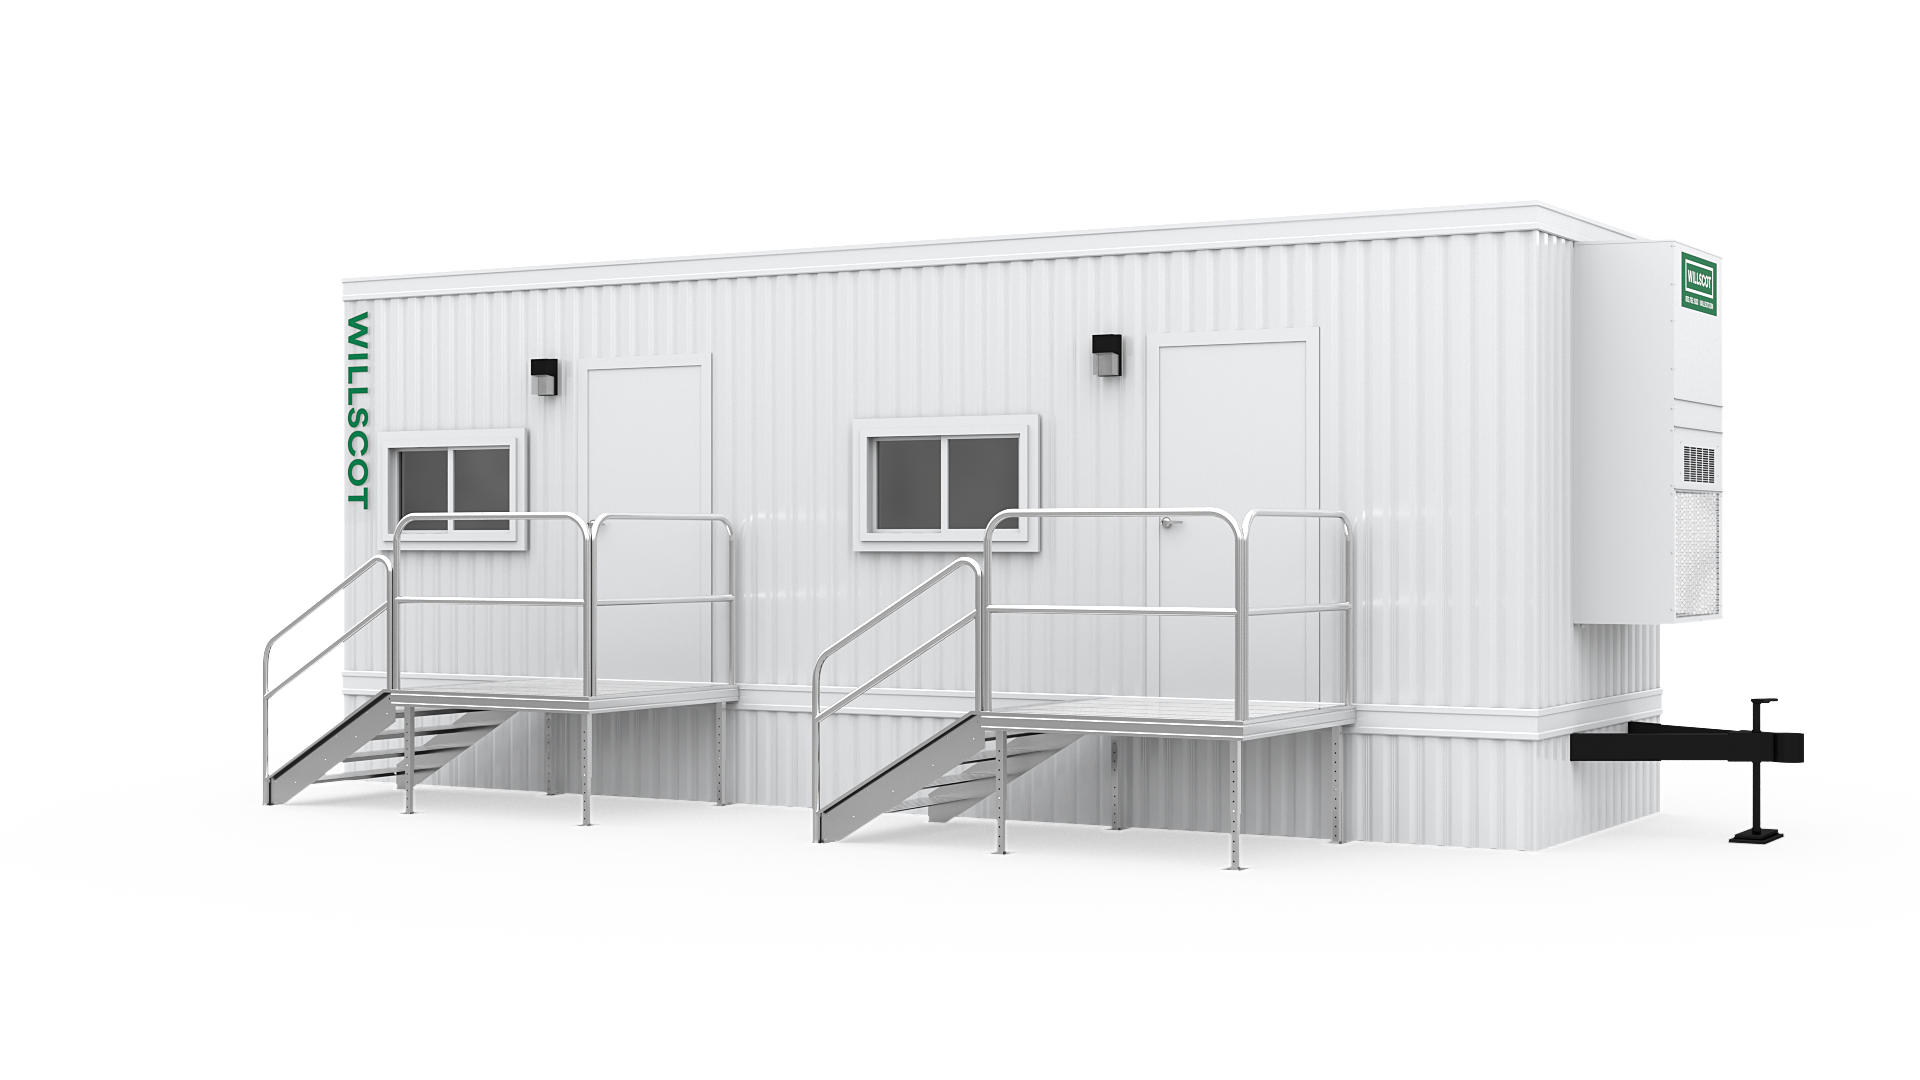 Rent Storage Container - Your No.1 Mobile Storage Container Rental